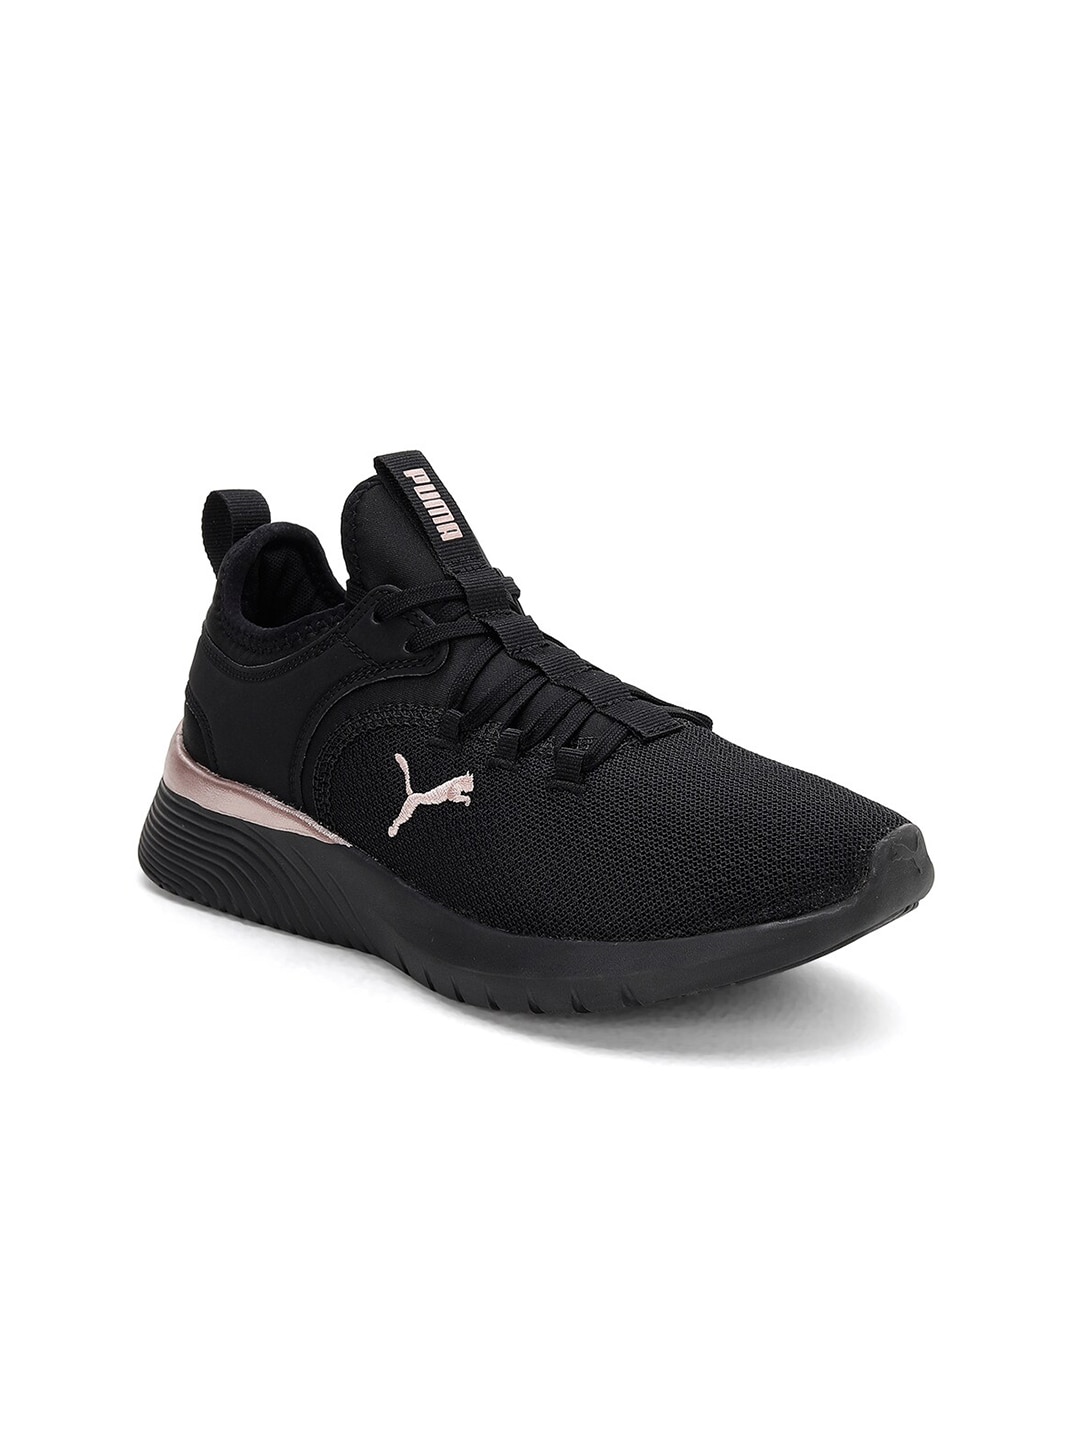 Puma Women Black Starla Women's Shoes Textile Training or Gym Shoes Price in India